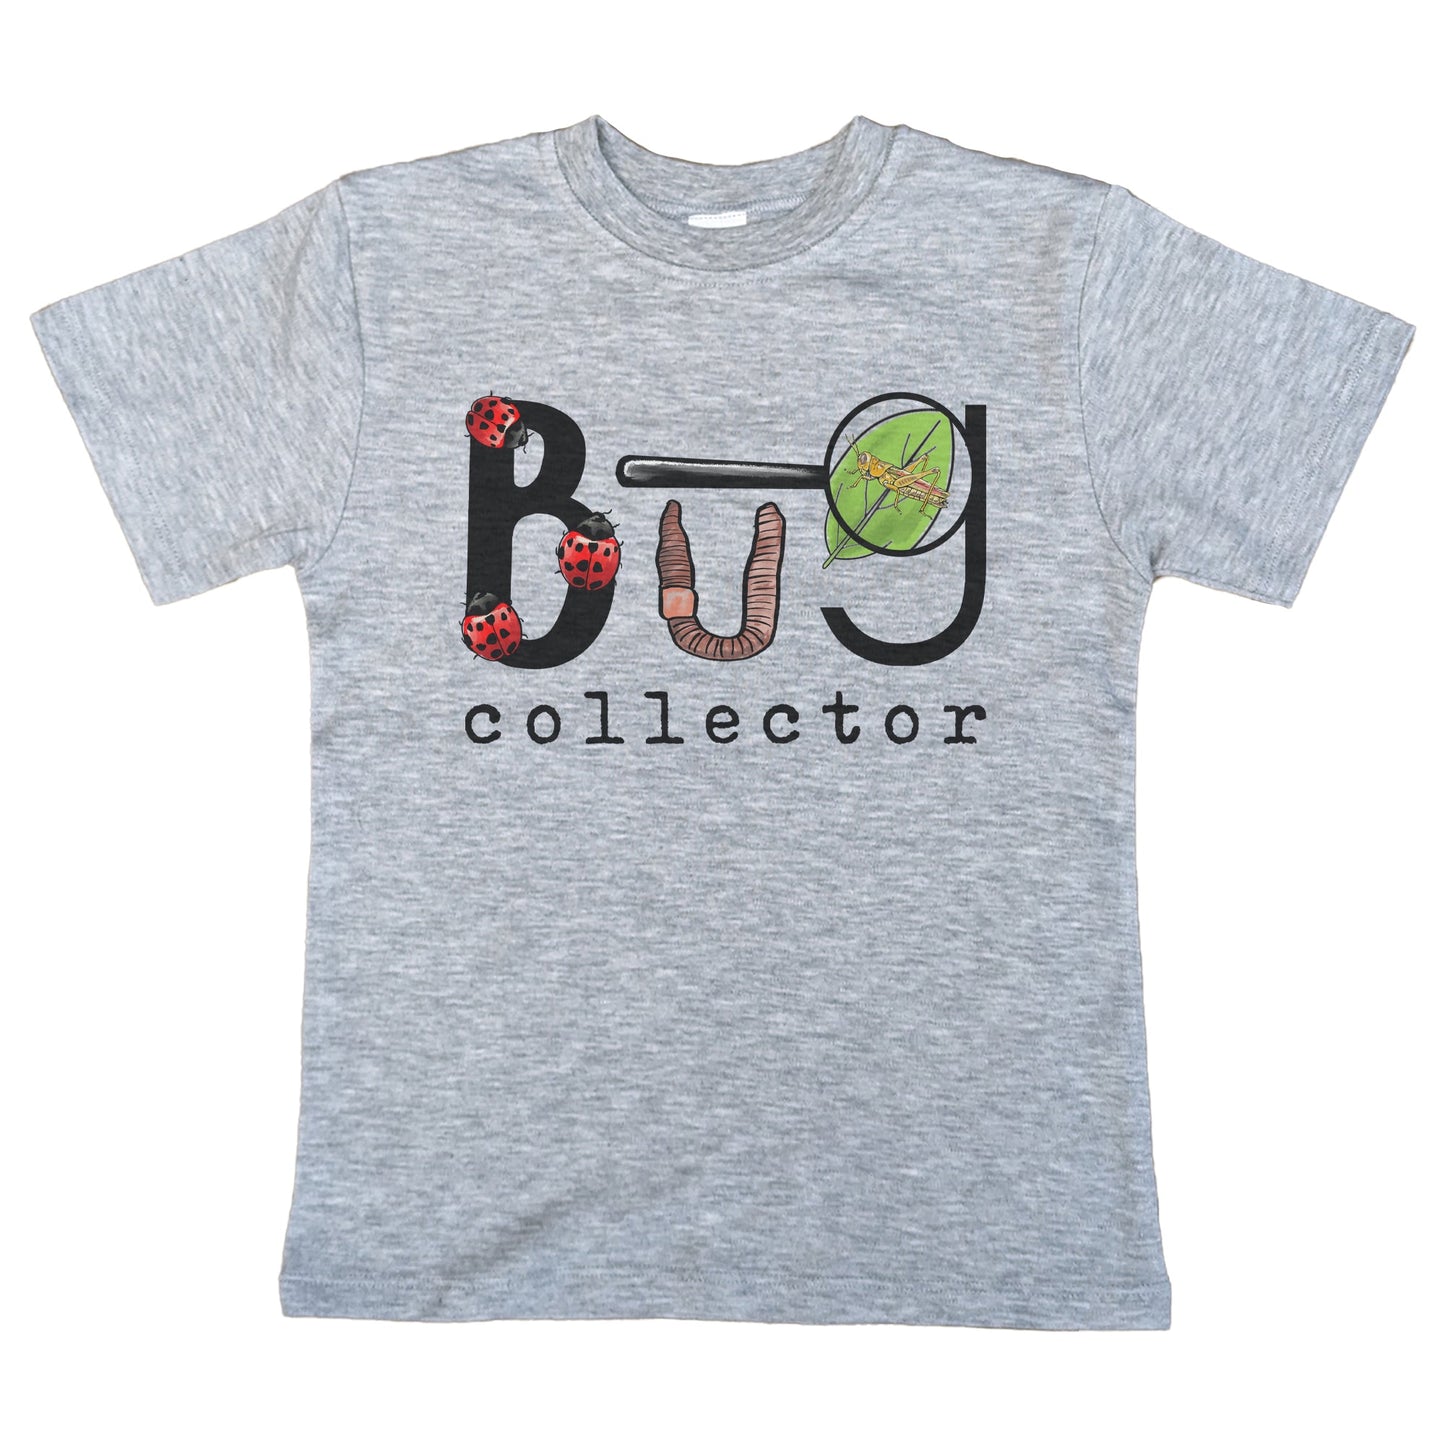 "Bug Collector" Grey Toddler and Youth T-shirt for Bug Enthusiasts